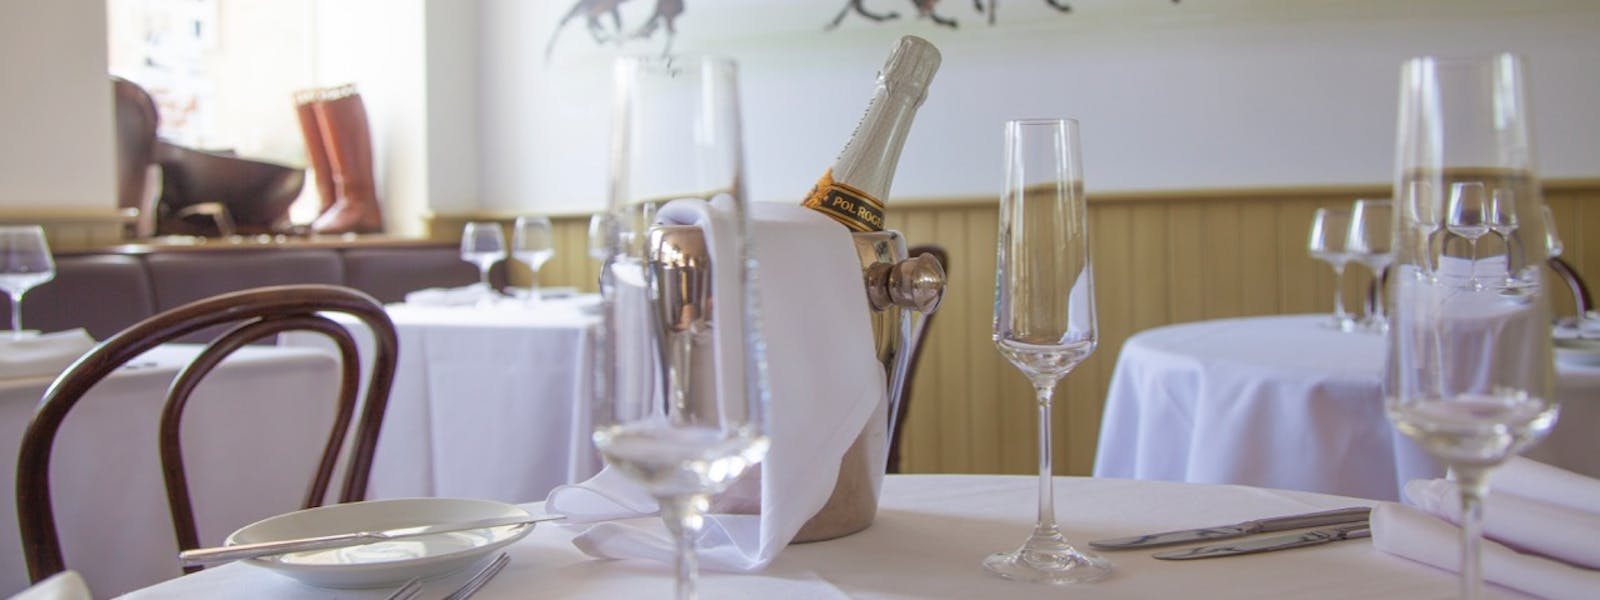 The Tack Room Restaurant & Bar, boutique continental dining in Middleham, Yorkshire Dales, high quality food and service